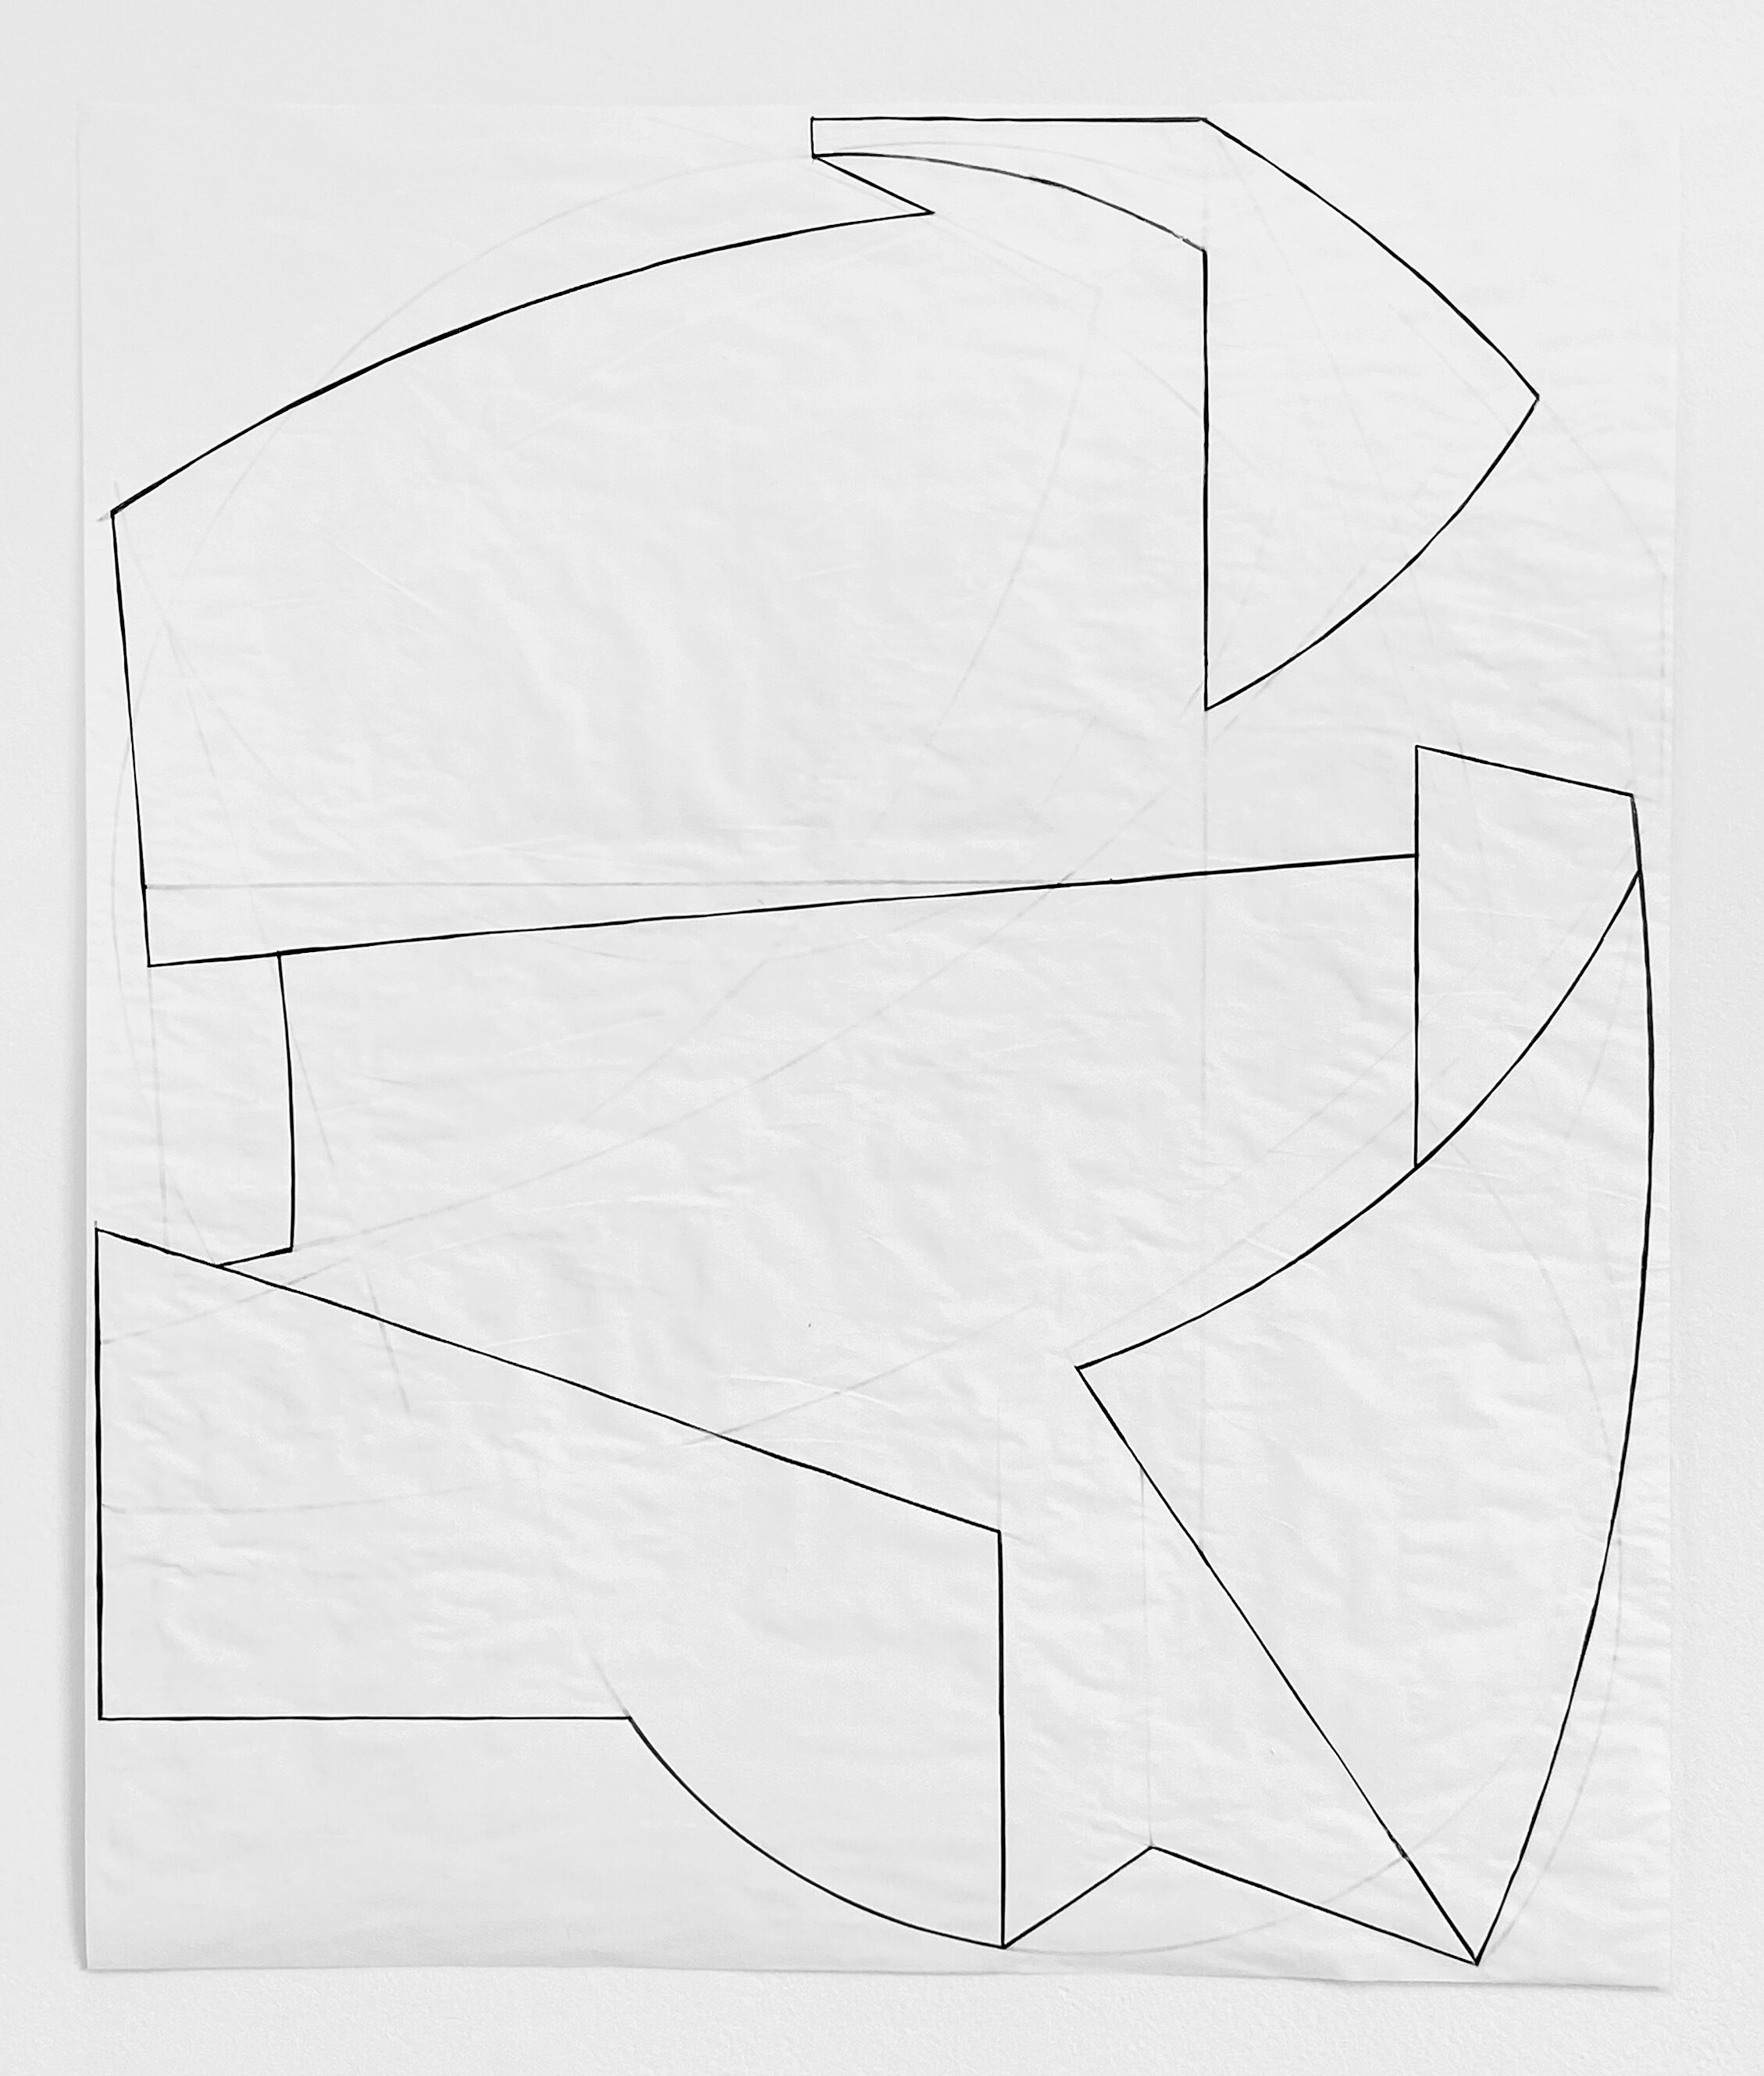   Untitled Drawing 83 , 2020, acrylic ink and gesso on vellum, 32 x 27 in 